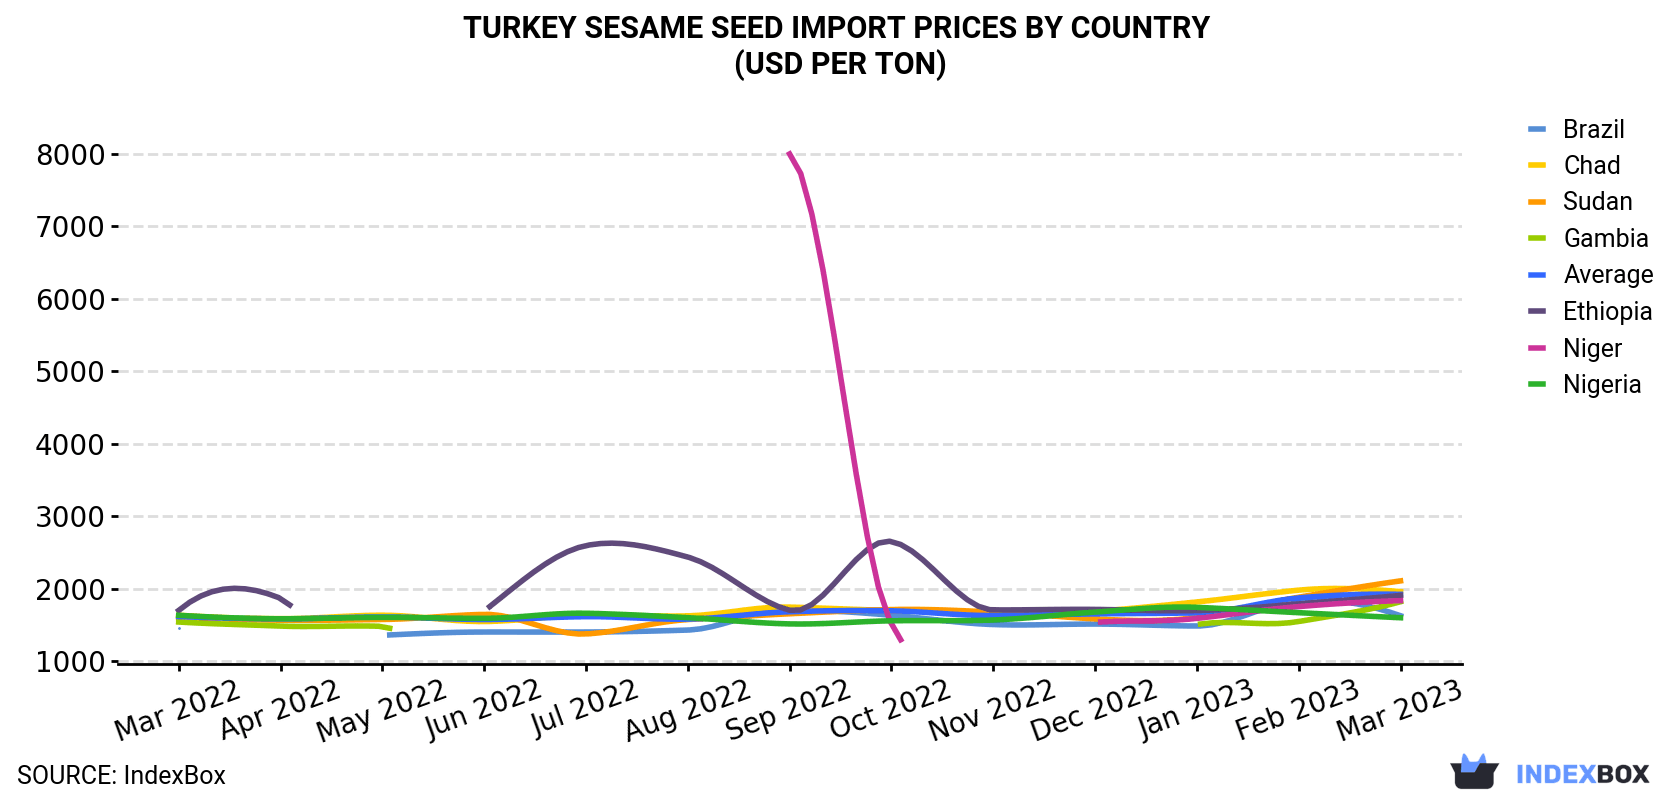 Turkey Sesame Seed Import Prices By Country (USD Per Ton)